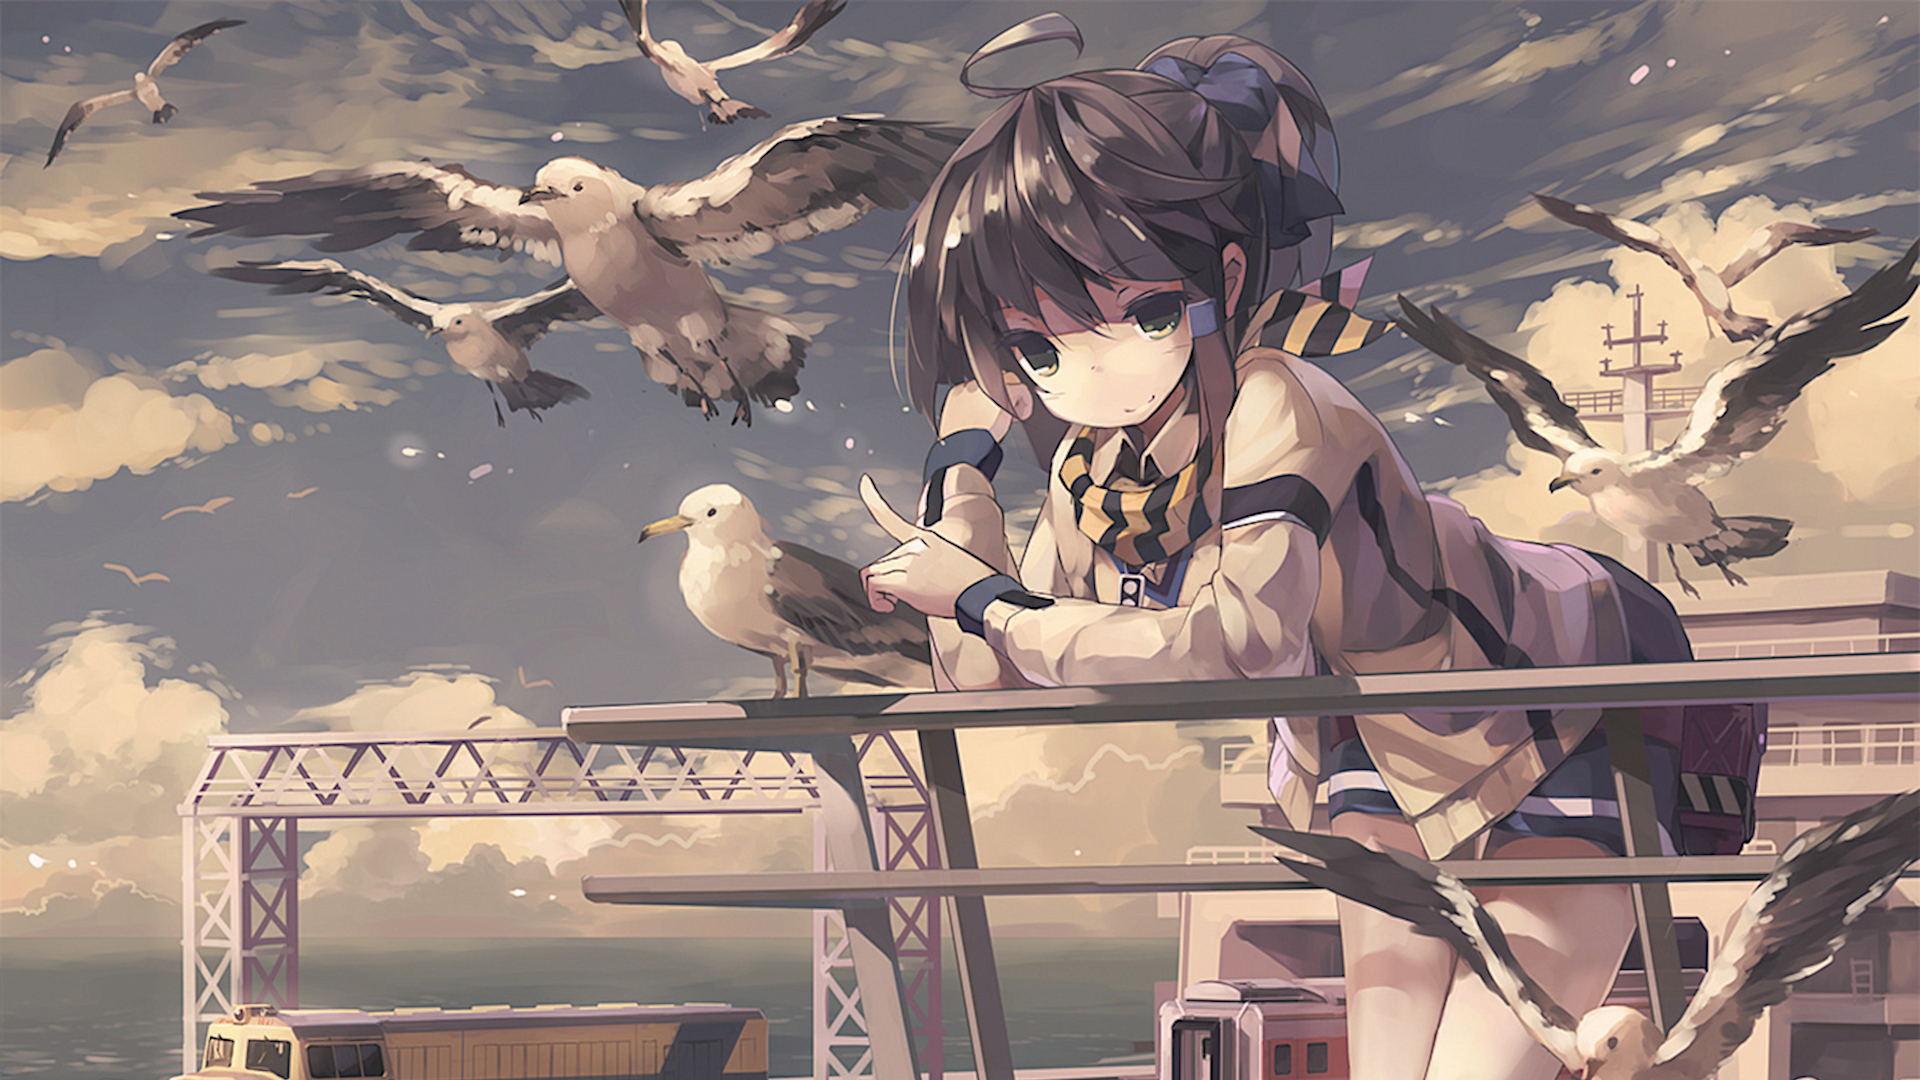 Scarf Brown Eyes Brunette Sea Gulls Sea Clouds Sky Finger Pointing Leaning Anime Girls Outdoors Rail 1920x1080